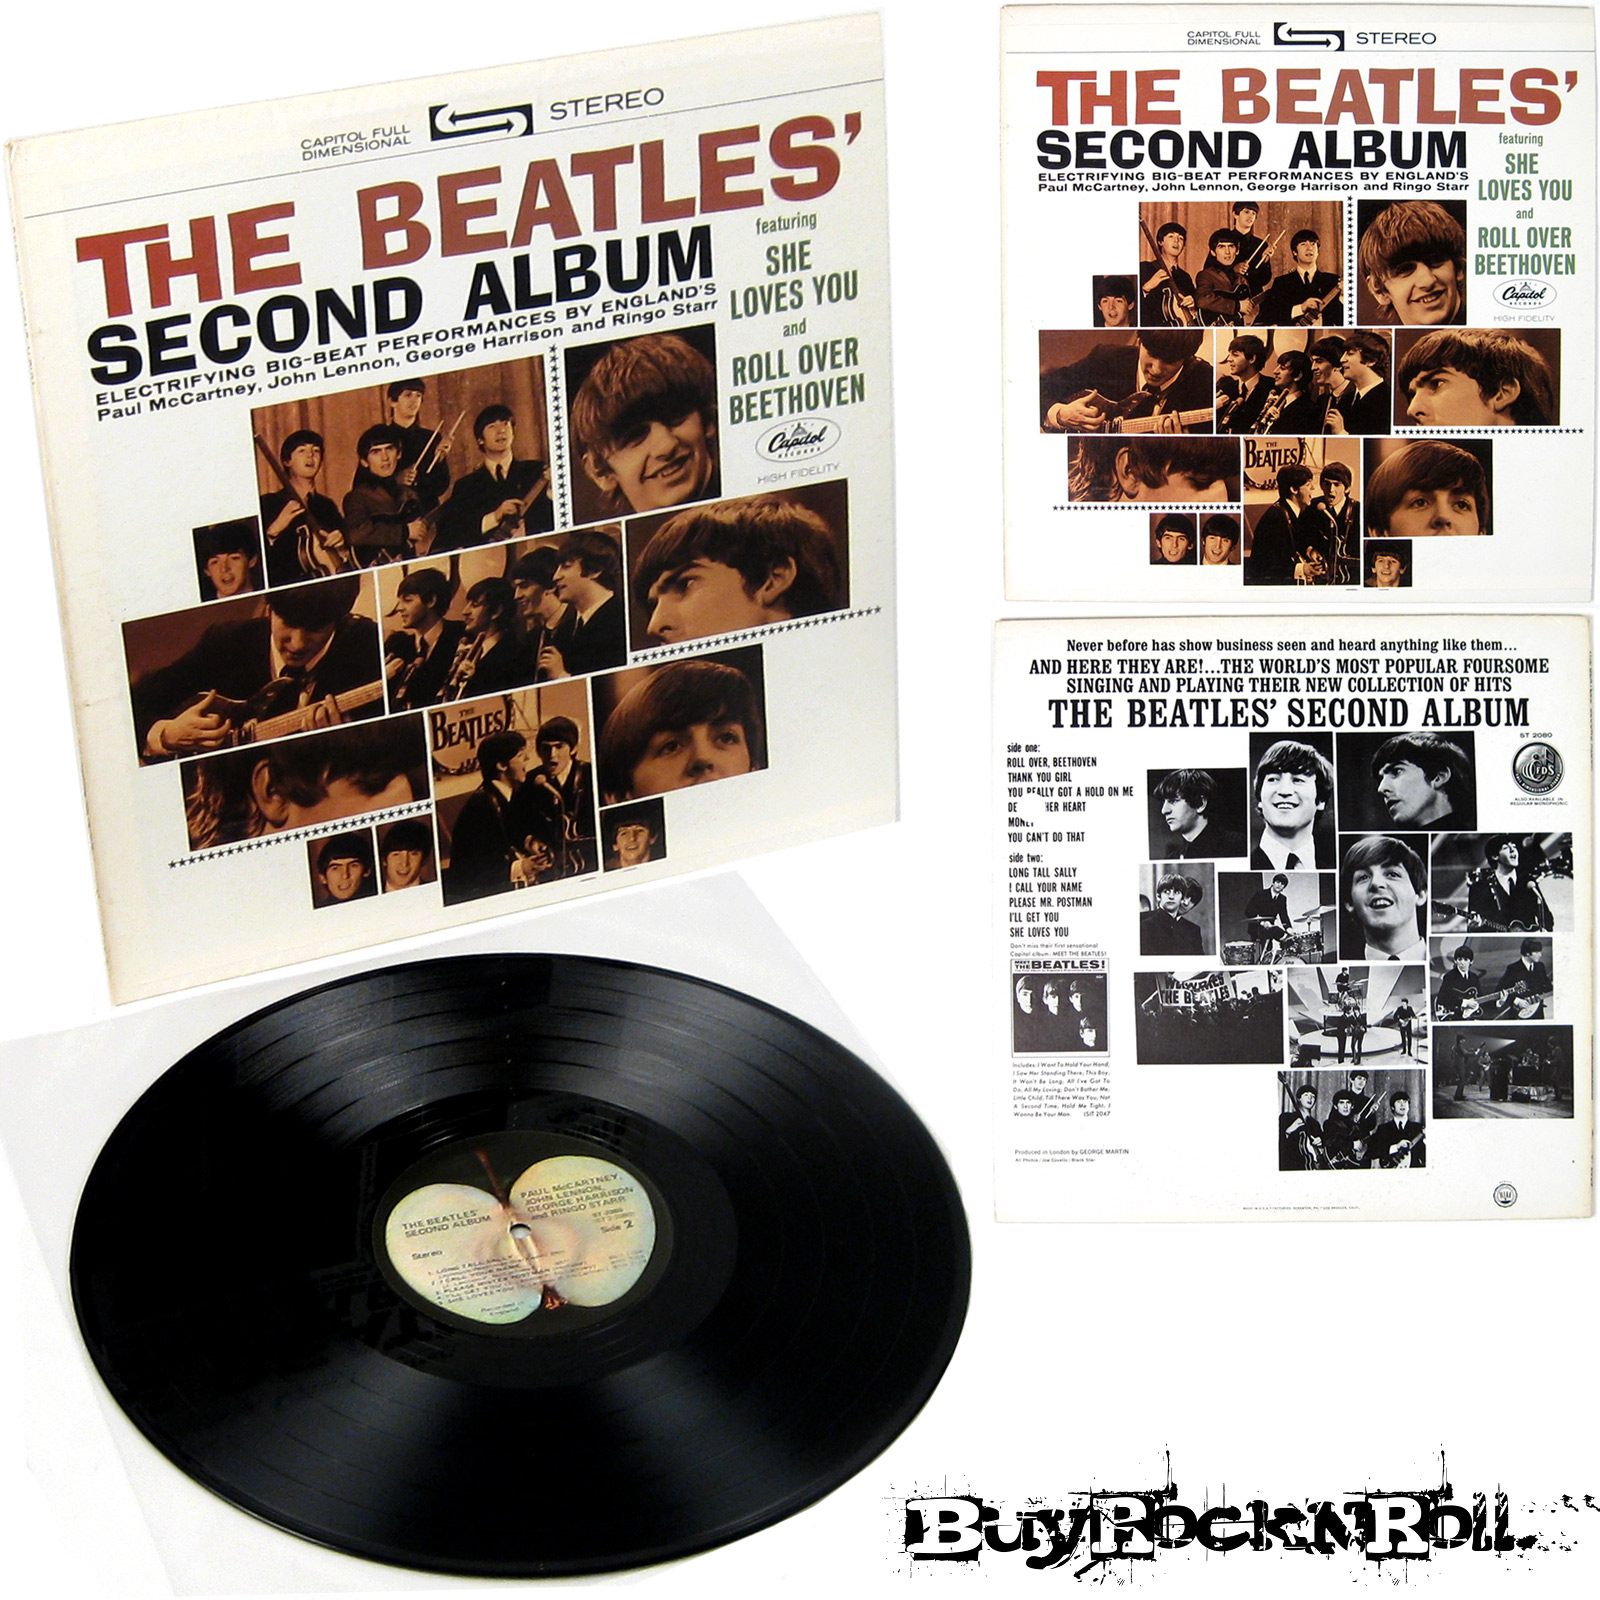 The Beatles Second Album Stereo Official Album By The Beatles - www ...